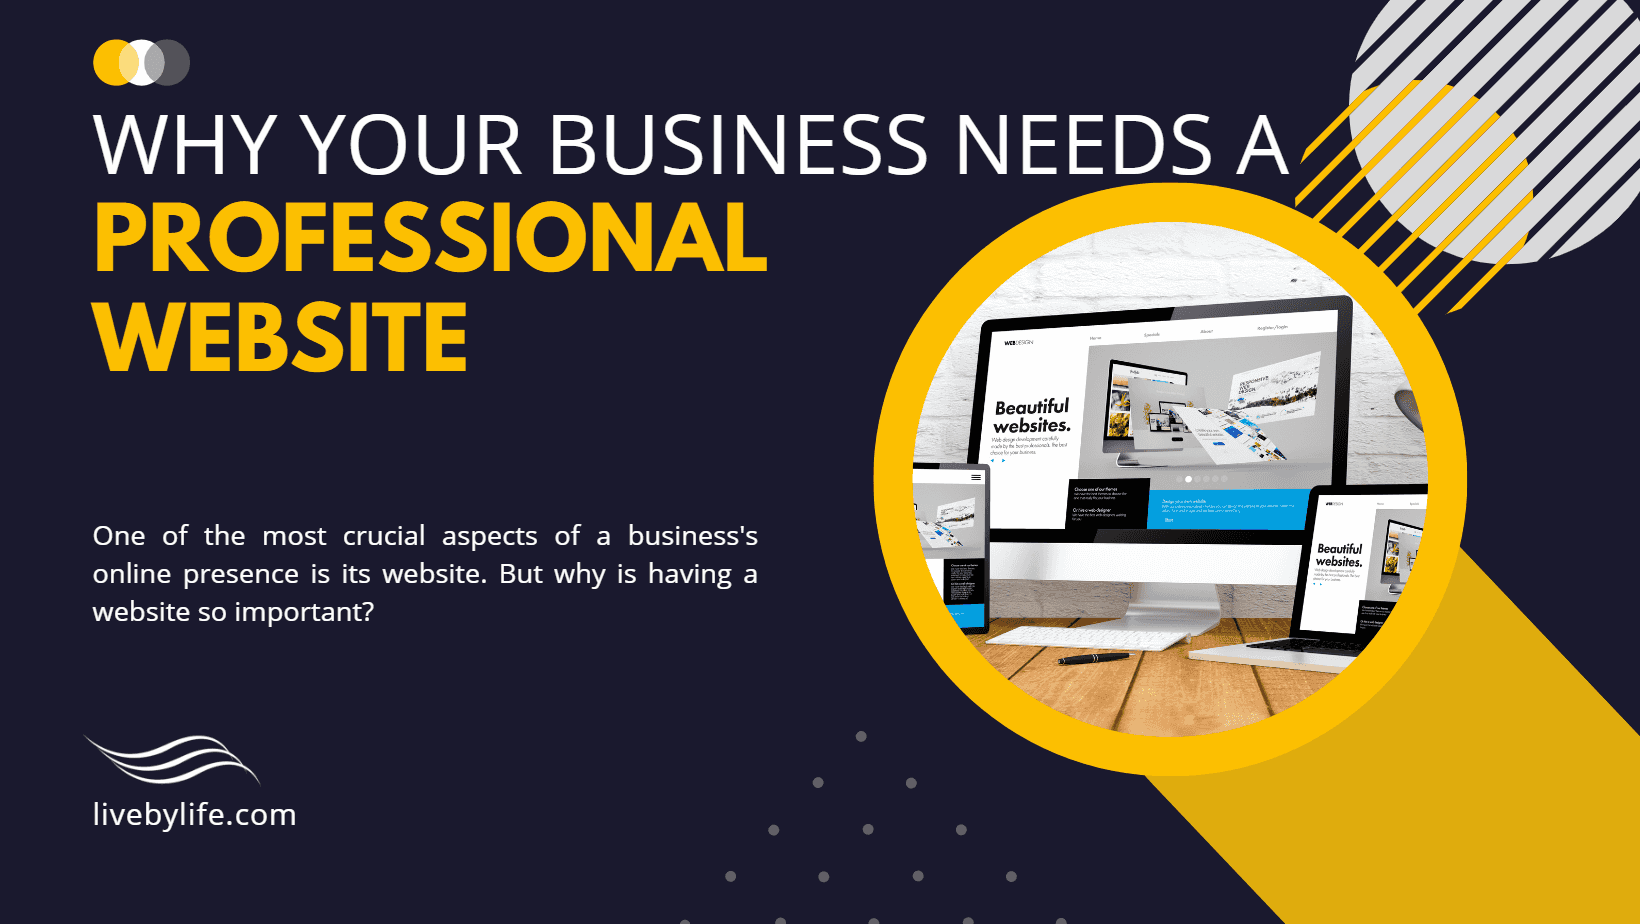 10 Reasons Why Your Business Needs a Professional Website